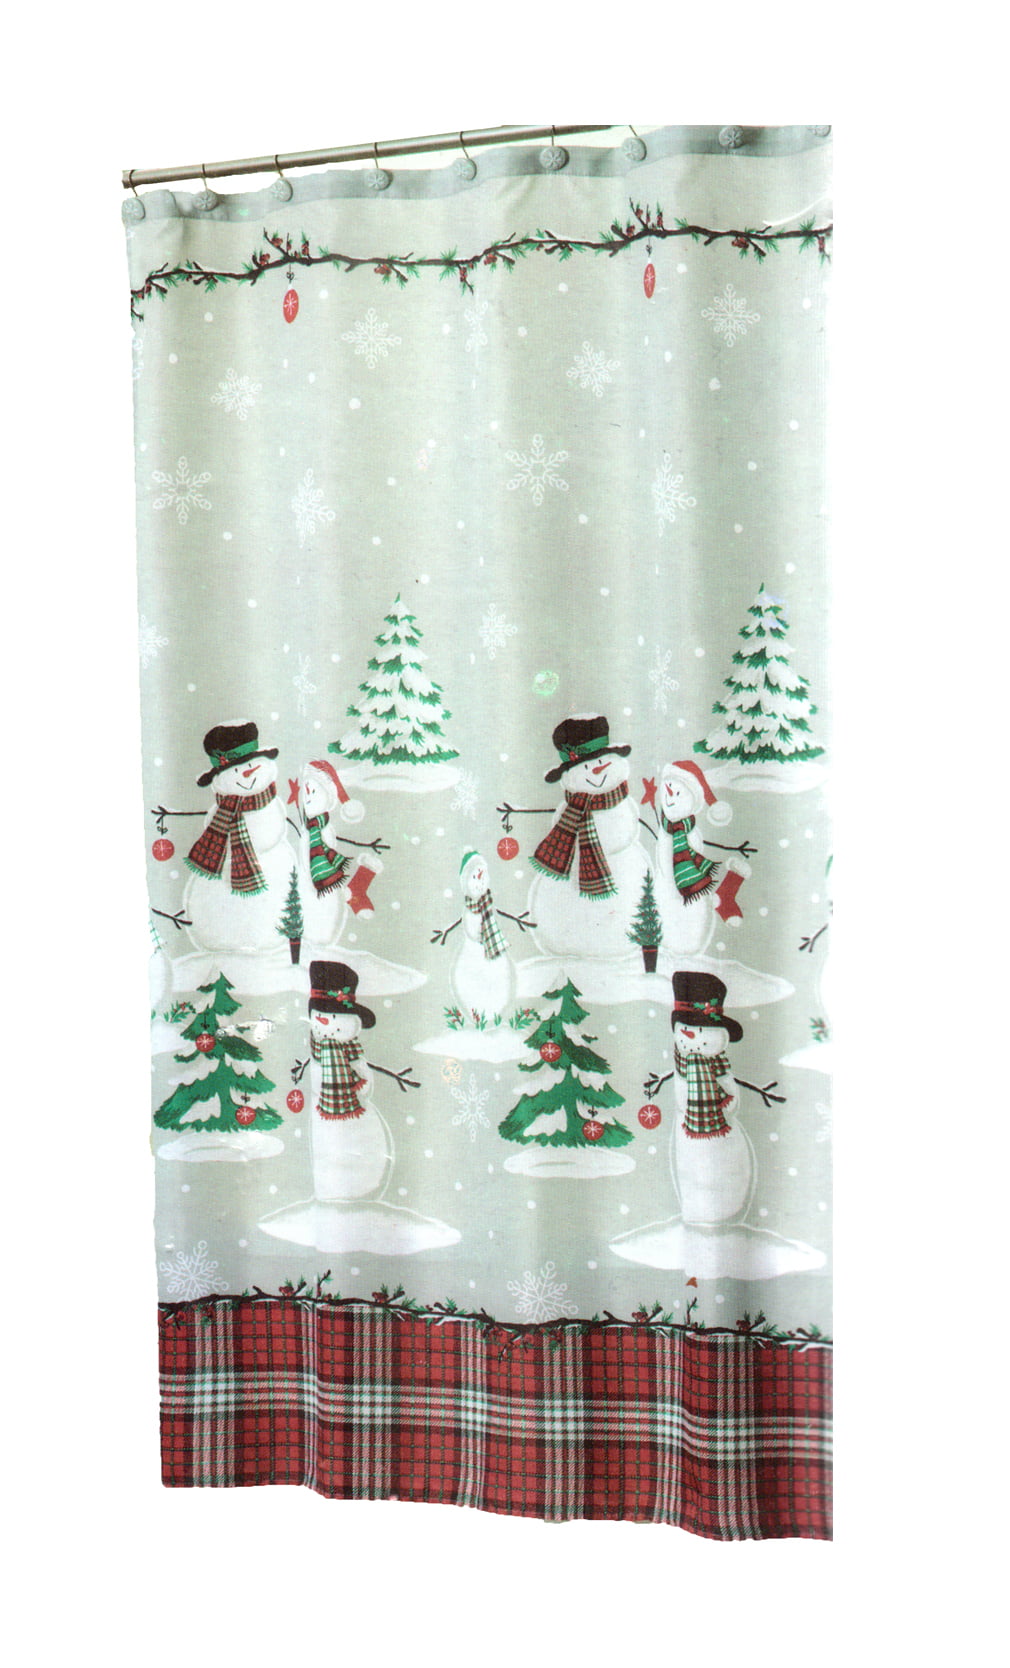 Decorative Fabric Shower Curtain, Snow Time Country Snowman Shower Curtain